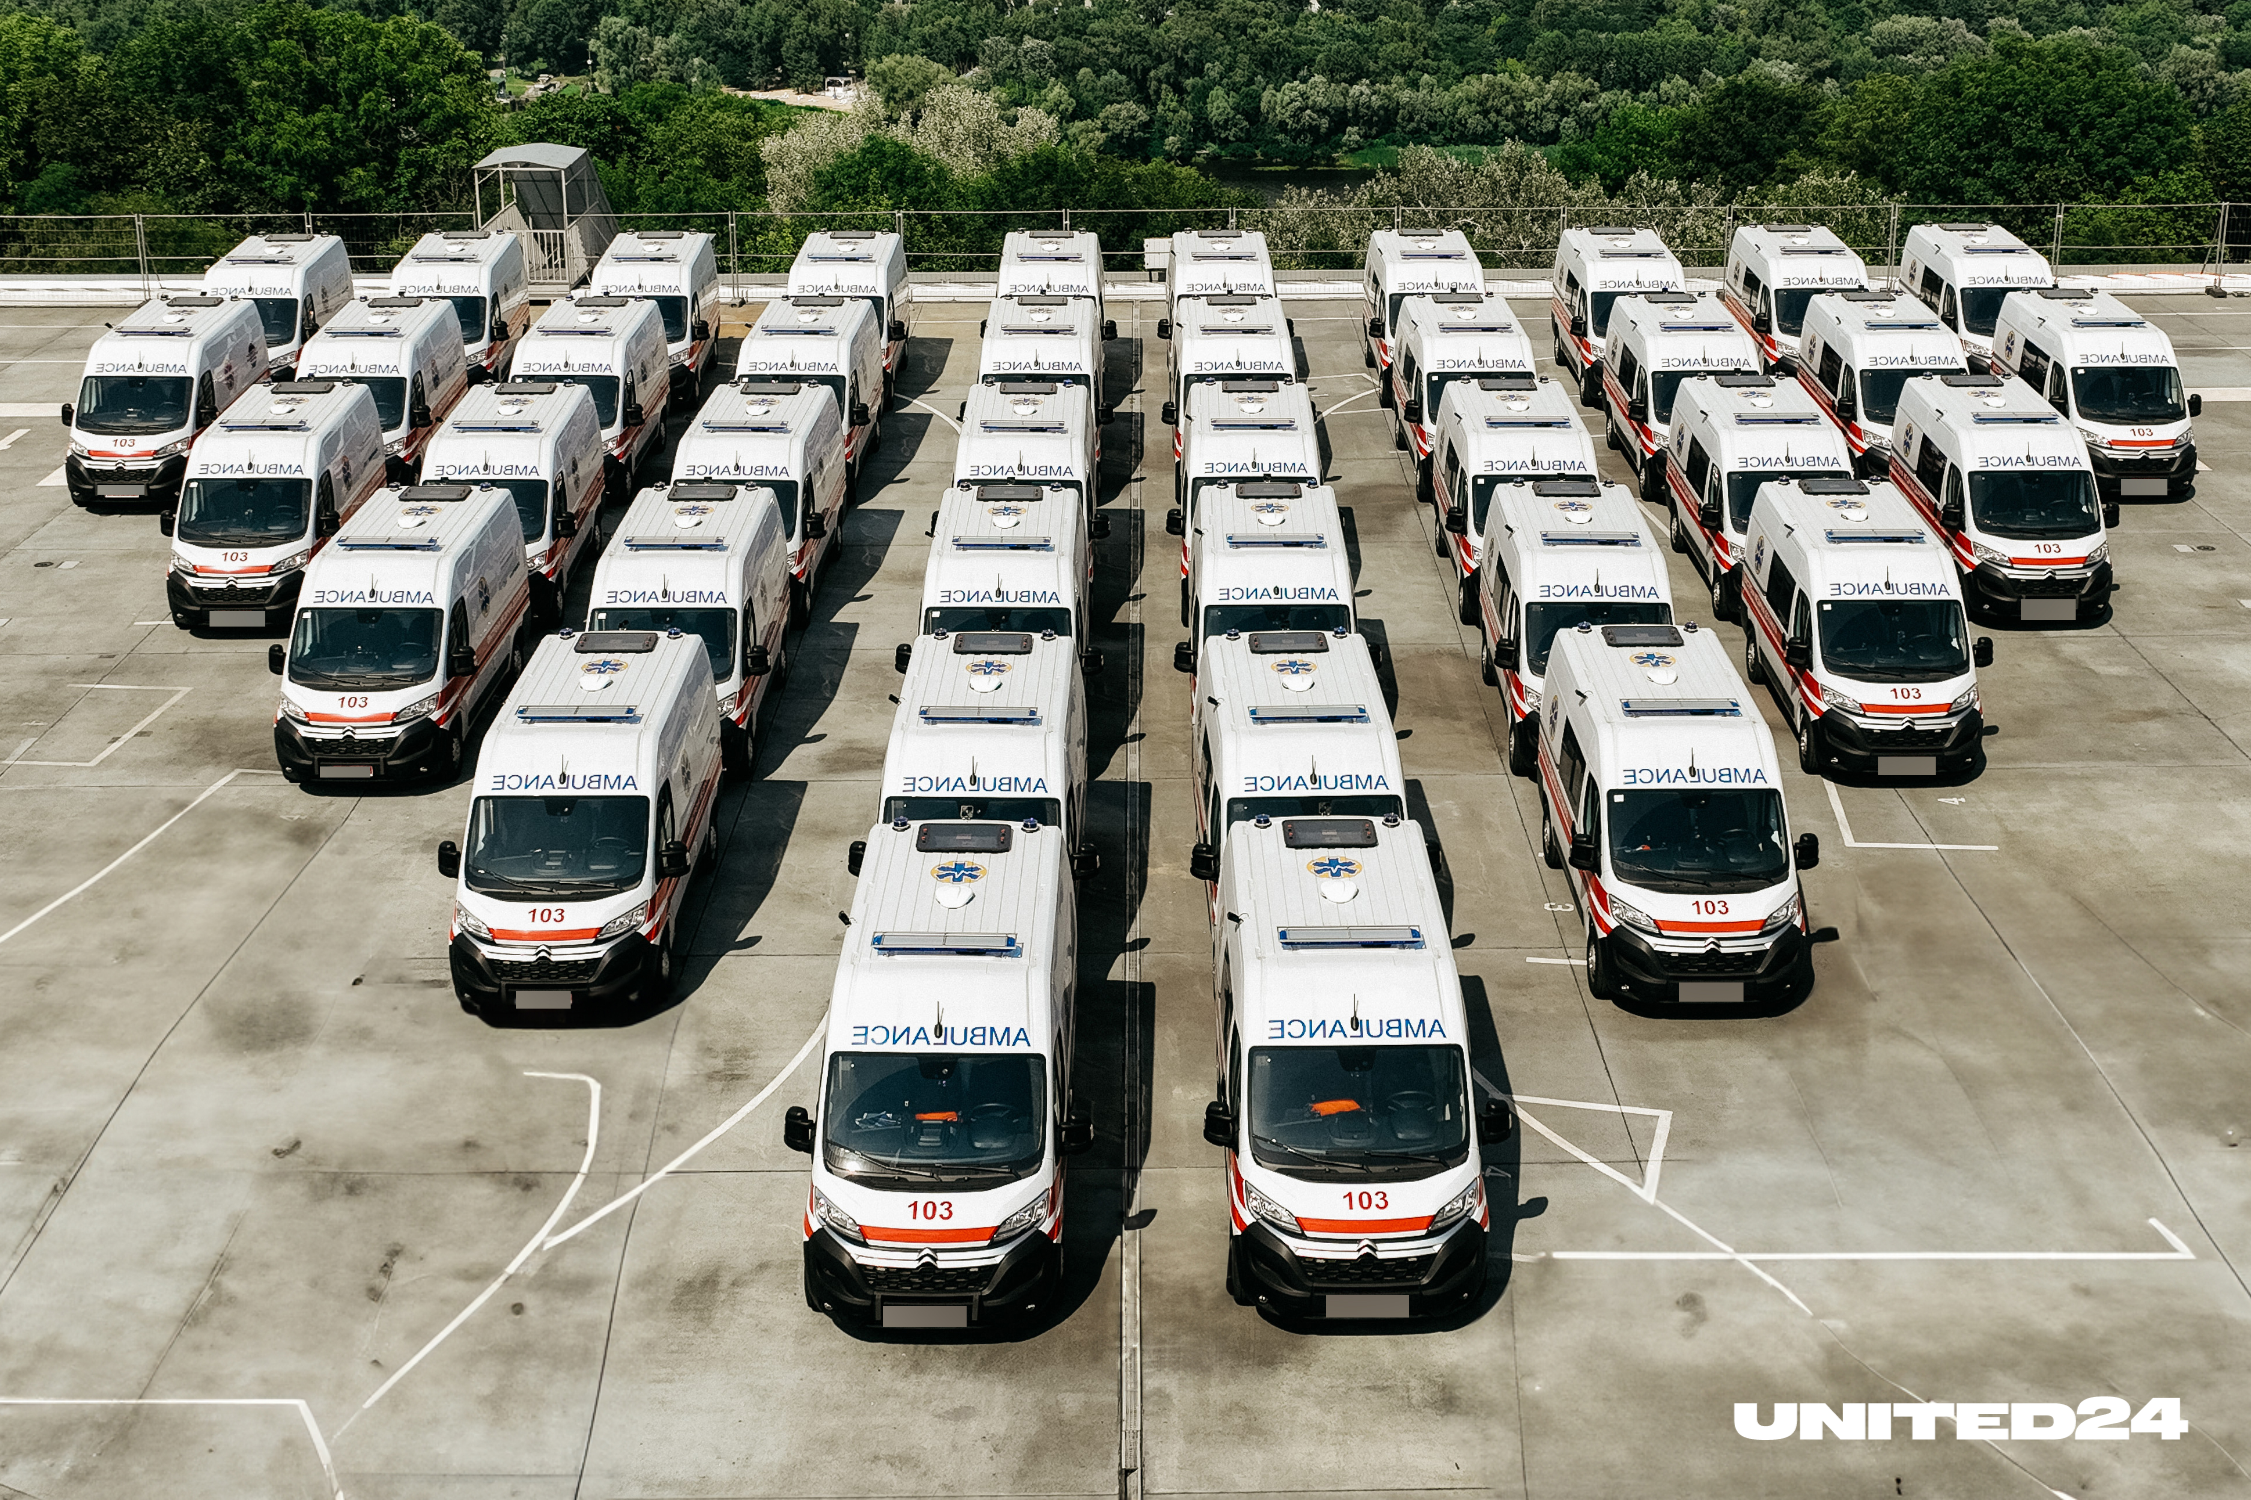 205 ambulances have been purchased with funds raised via UNITED24